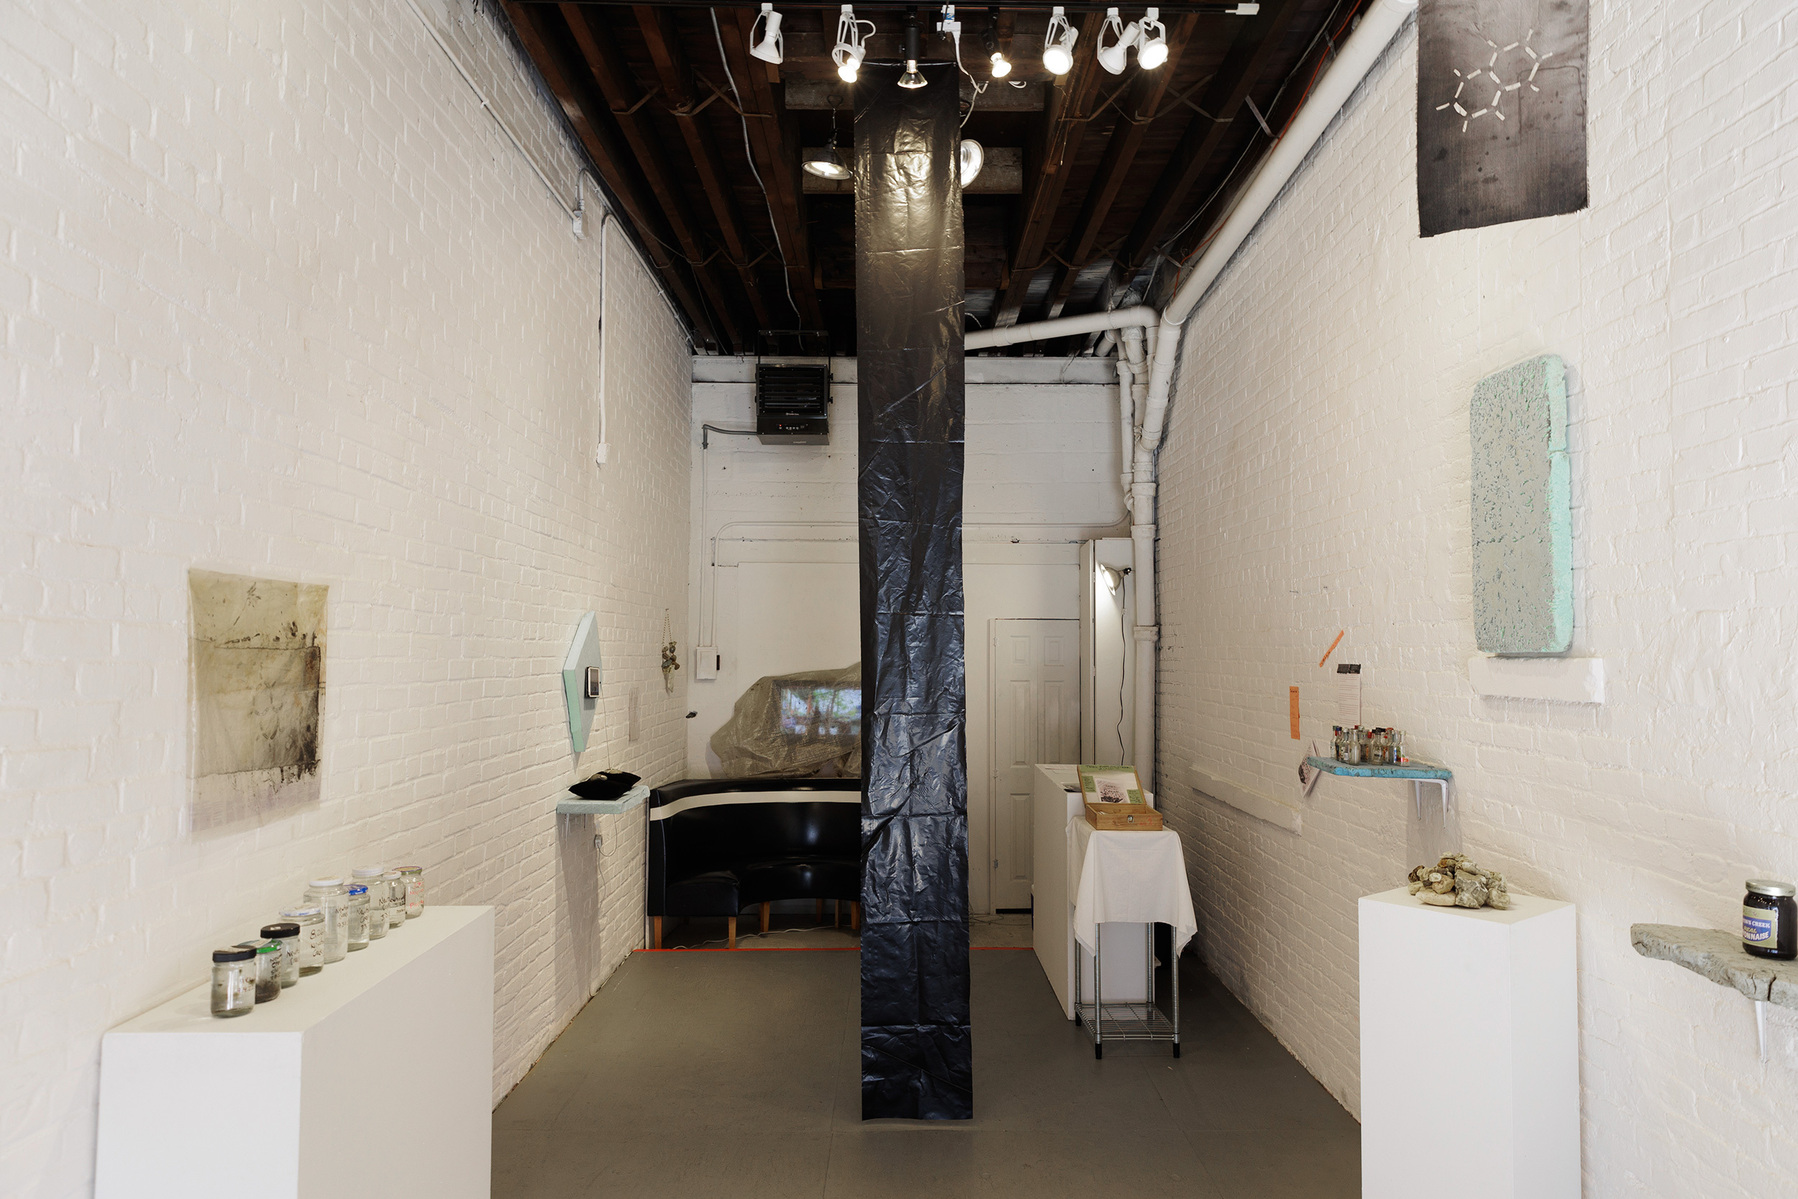 Installation view showing works from Priscilla Stadler's SLUDGE project, an art installation created in response to researching Newtown Creek, a toxic waterway dividing Queens & Brooklyn, NYC. 